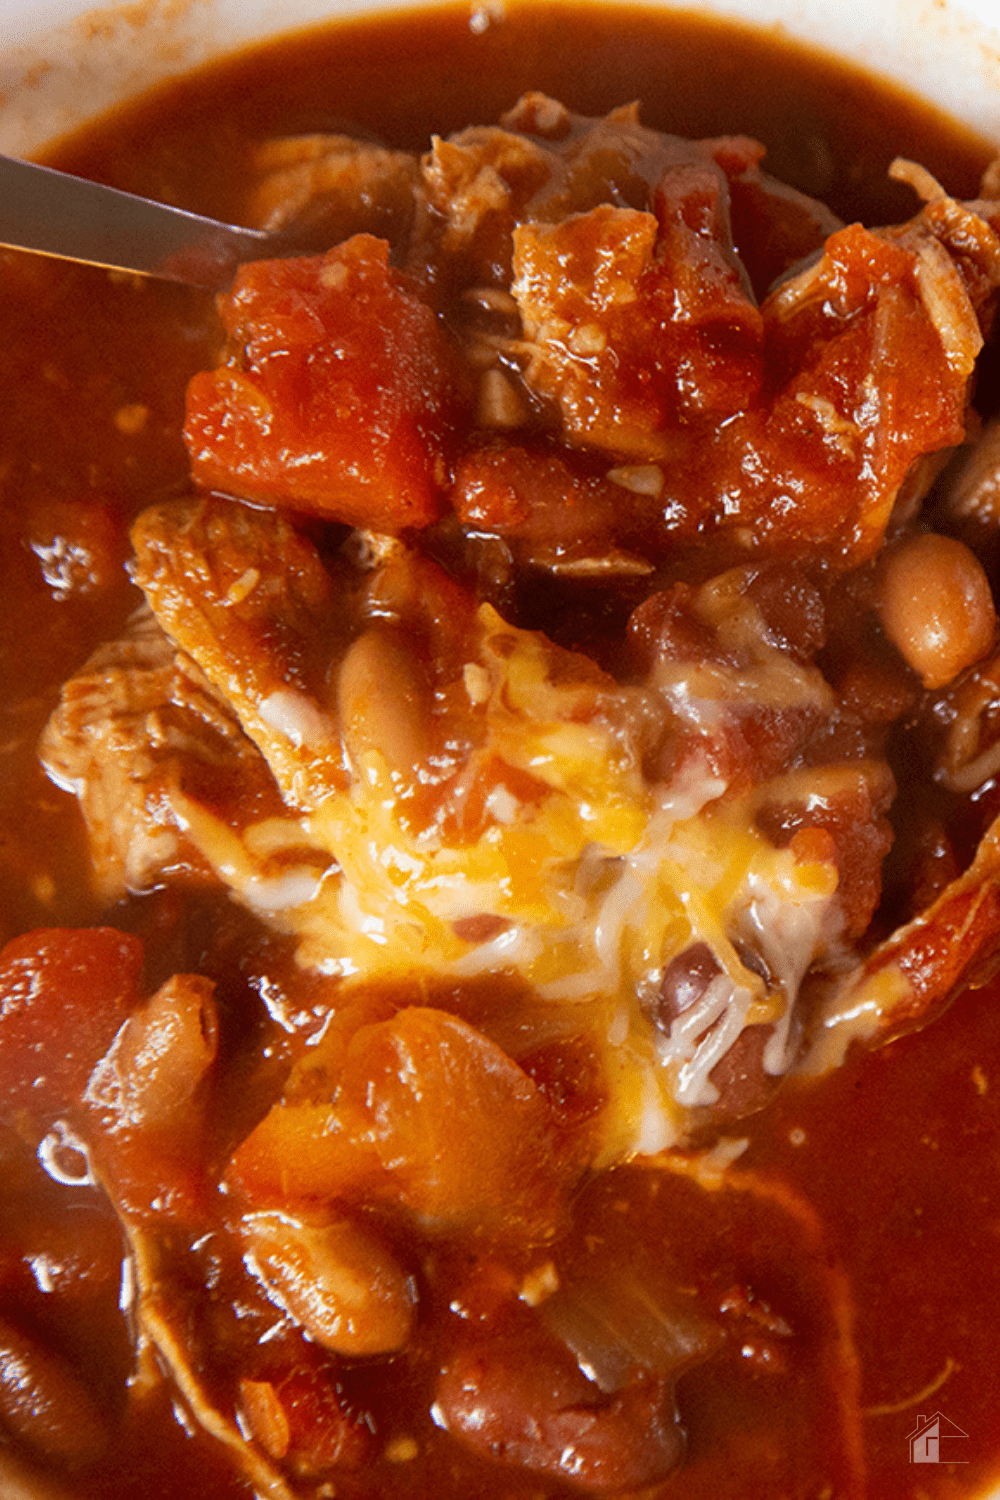 This pulled pork chili recipe is a delicious and easy way to change up your game. With the help of an Instant Pot, this meal can be on the table in no time! via @mystayathome